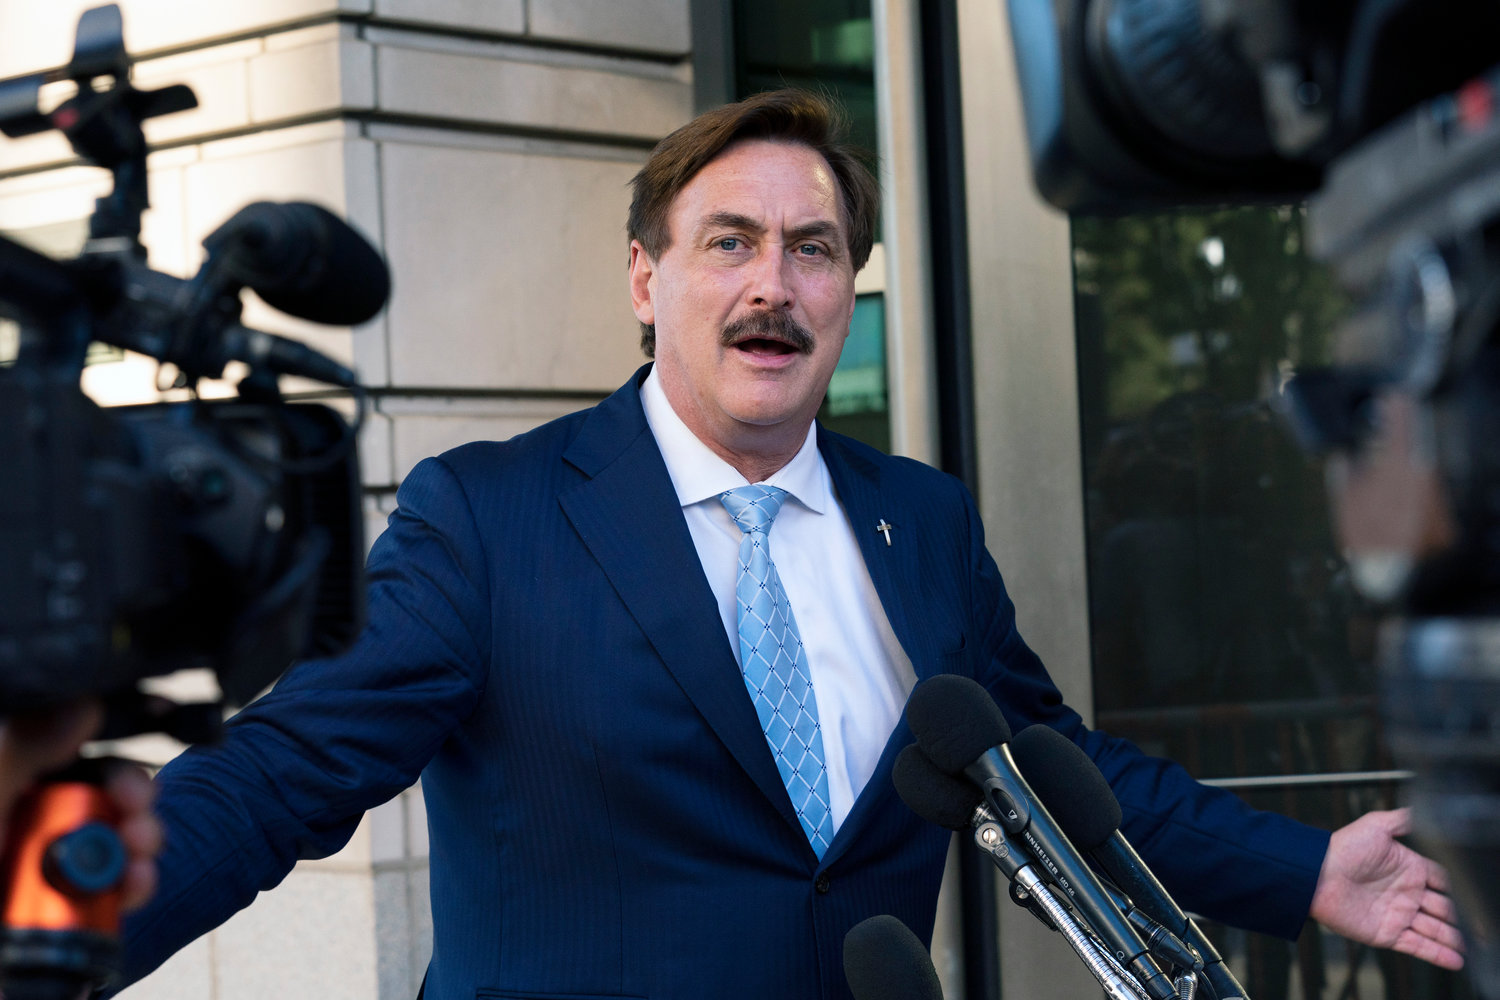 MyPillow chief executive Mike Lindell, speaks to reporters outside federal court in Washington, June 24, 2021. The Supreme Court says it won’t intervene in a lawsuit in which Dominion Voting Systems accused MyPillow chief executive Mike Lindell of defamation for falsely accusing the company of rigging the 2020 presidential election against former President Donald Trump.